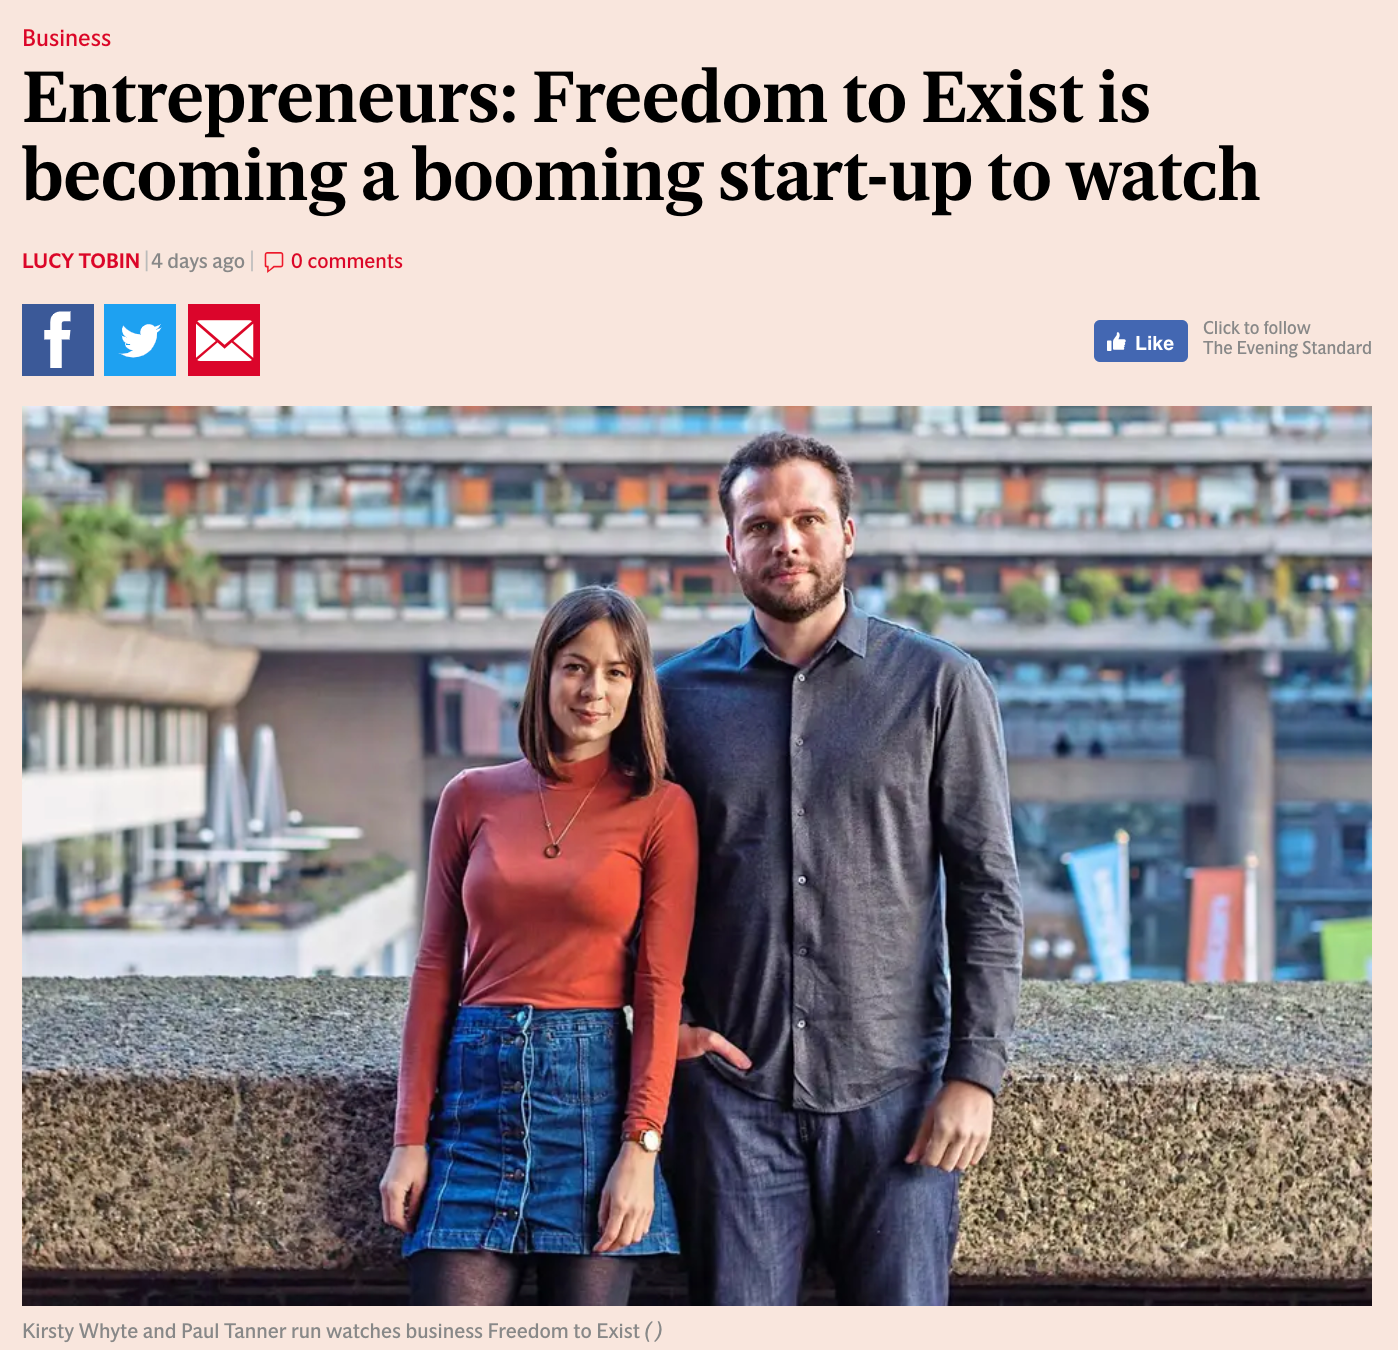 Evening Standard - Freedom To Exist - Kirsty Whyte & Paul Tanner